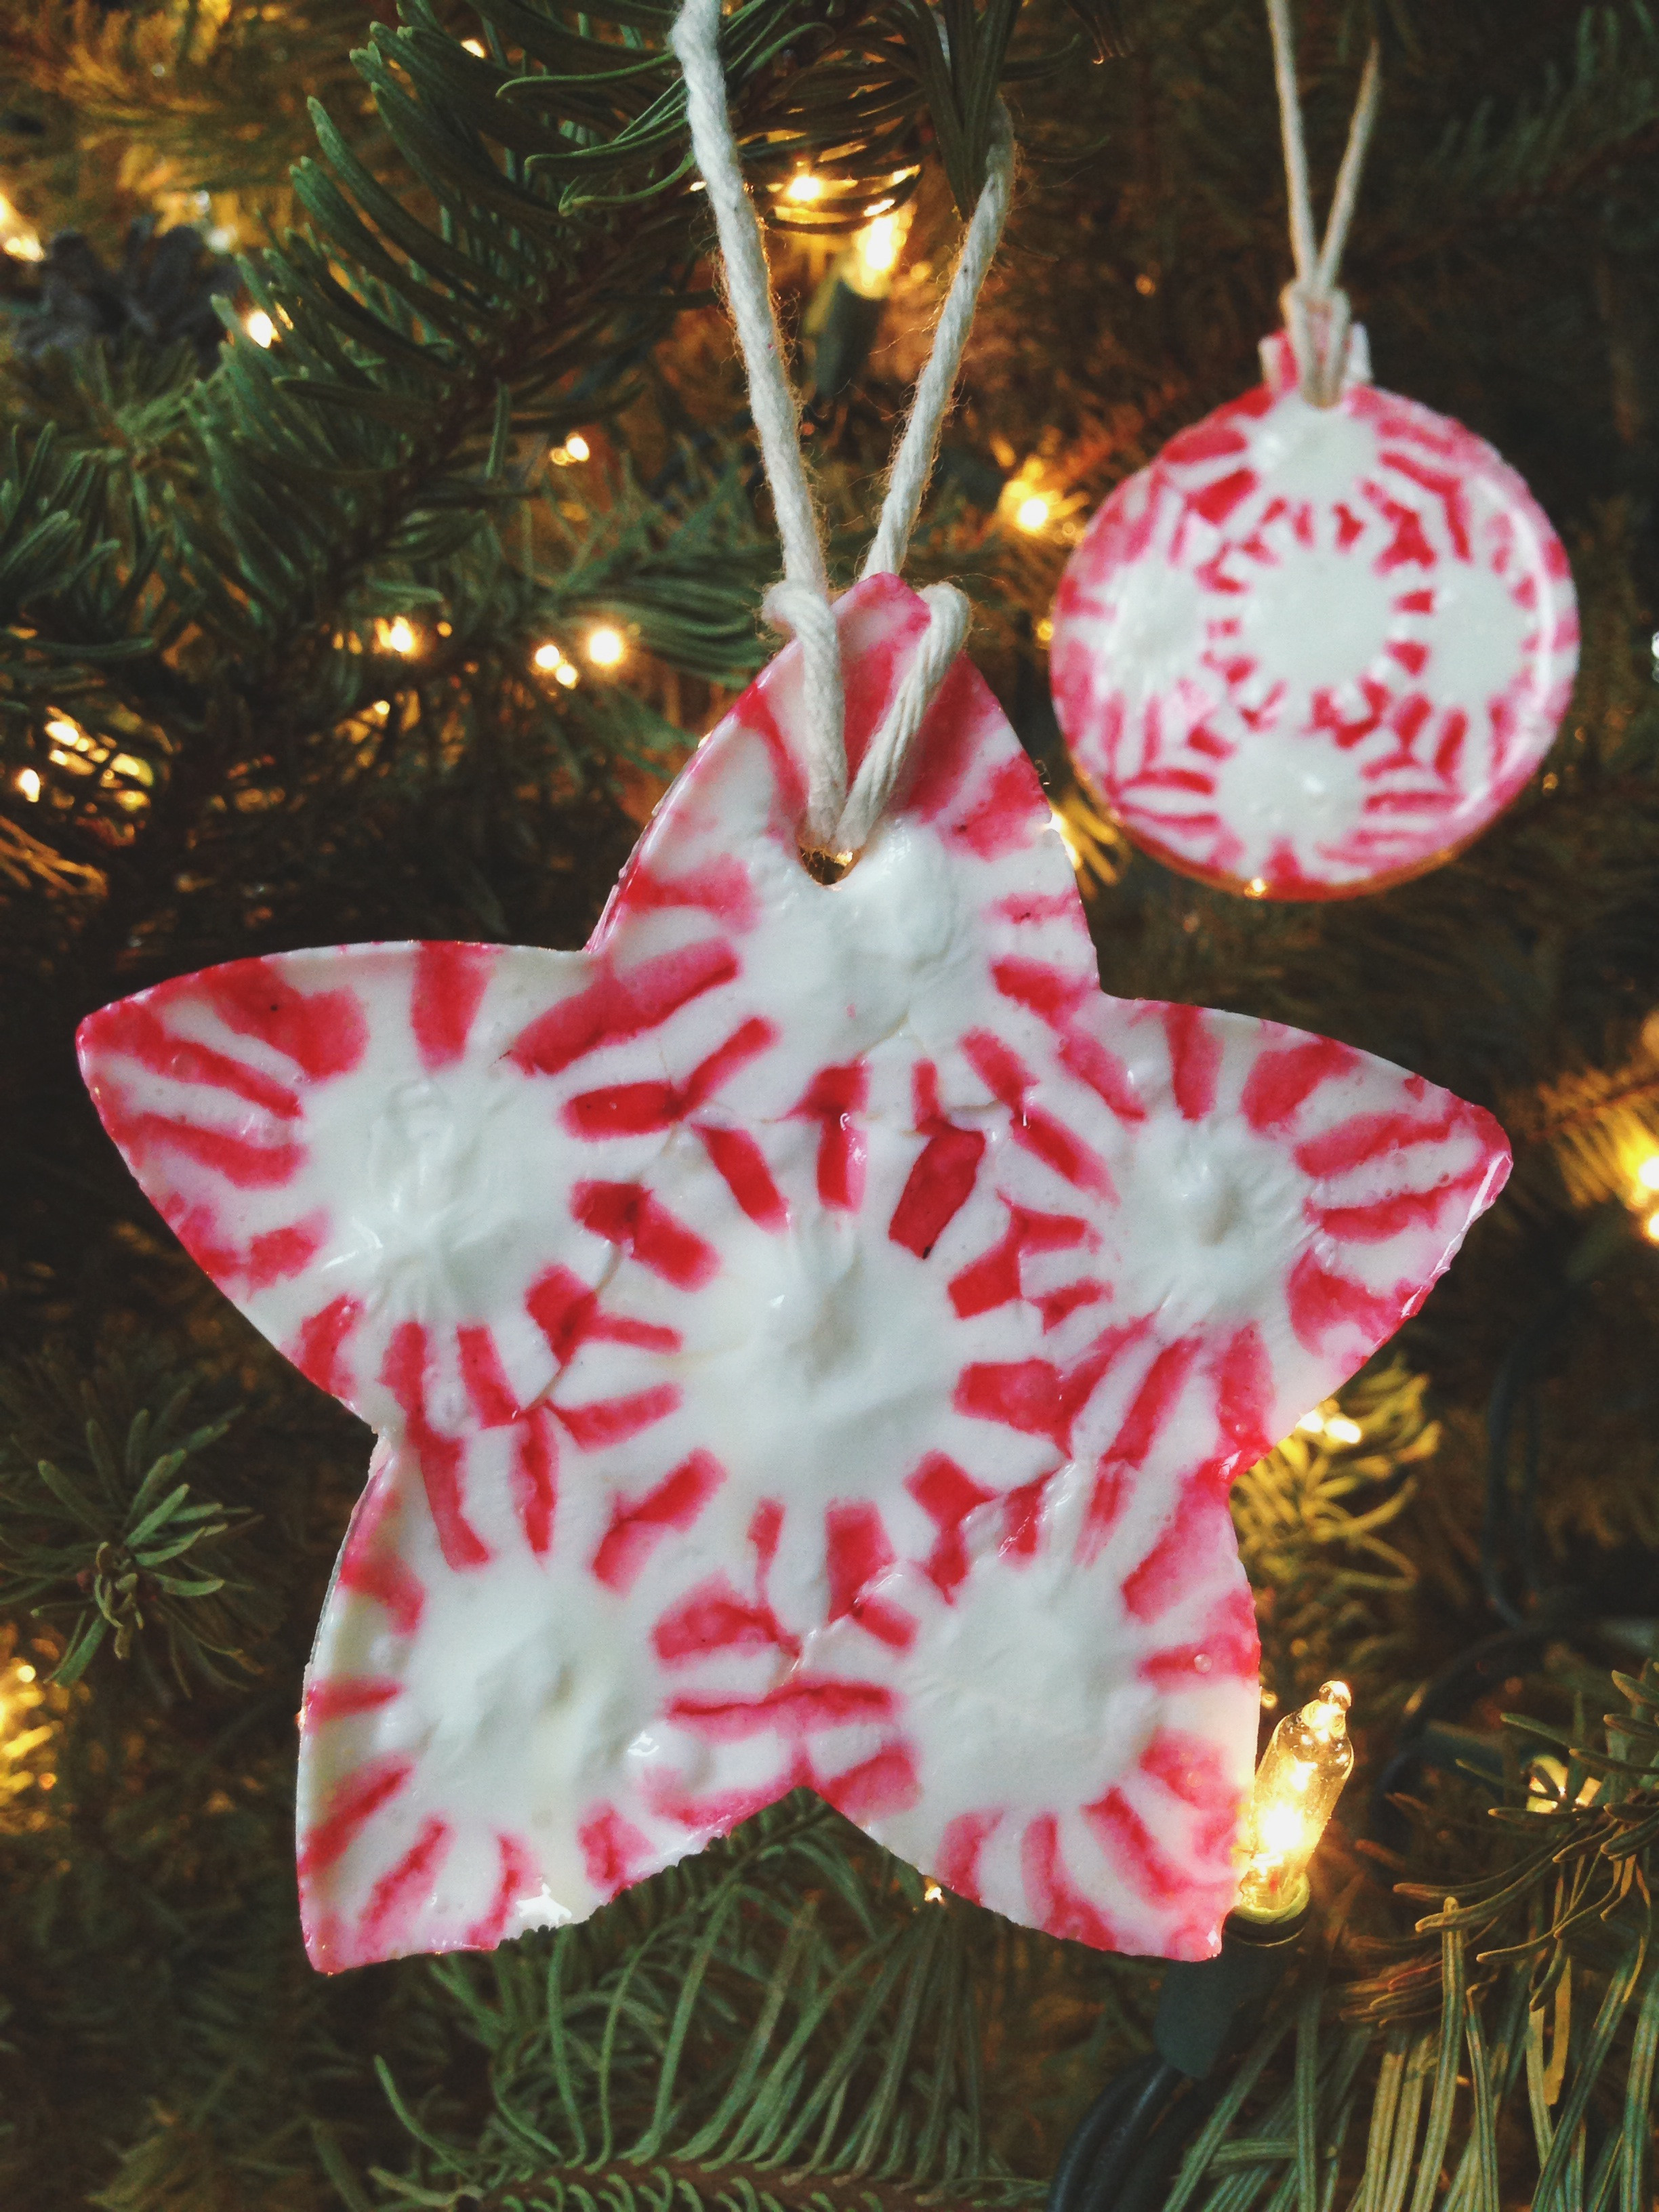 Peppermint Candy Christmas Ornaments
 25 Beautiful Handmade Ornaments